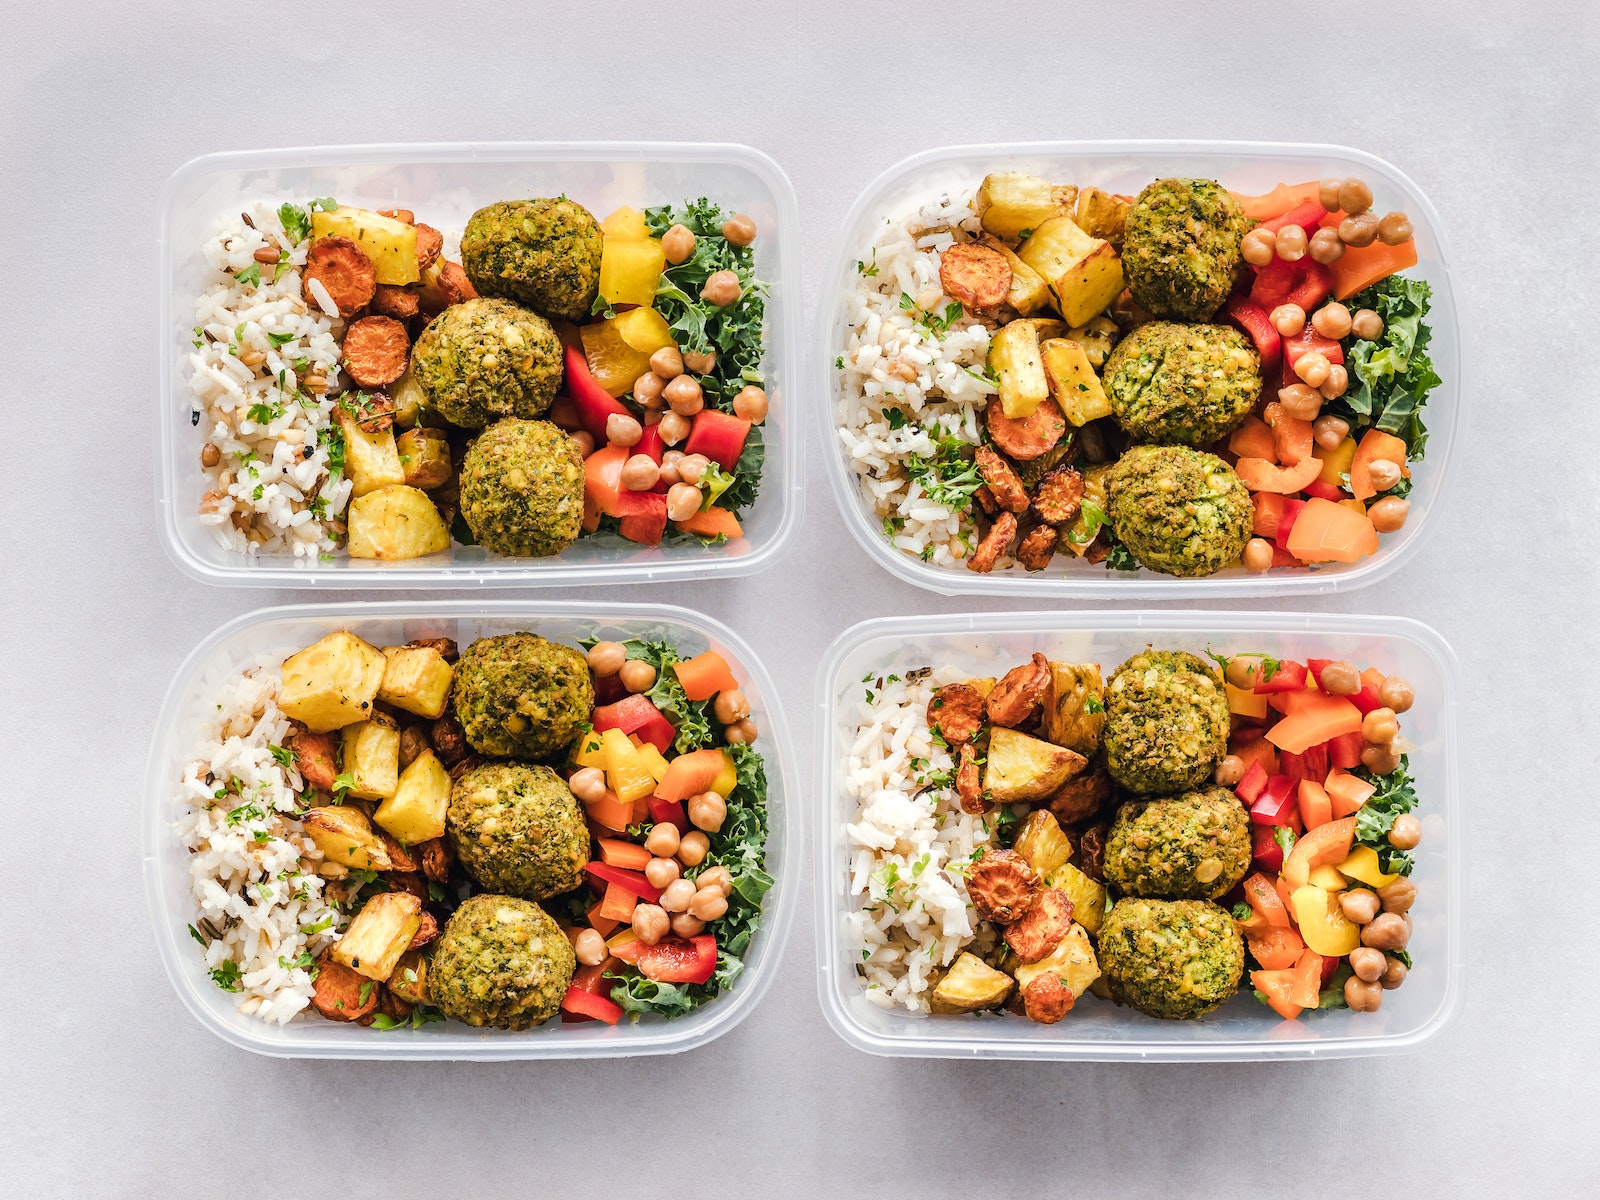 Meal prep bowls with falafel, veggies and carbs